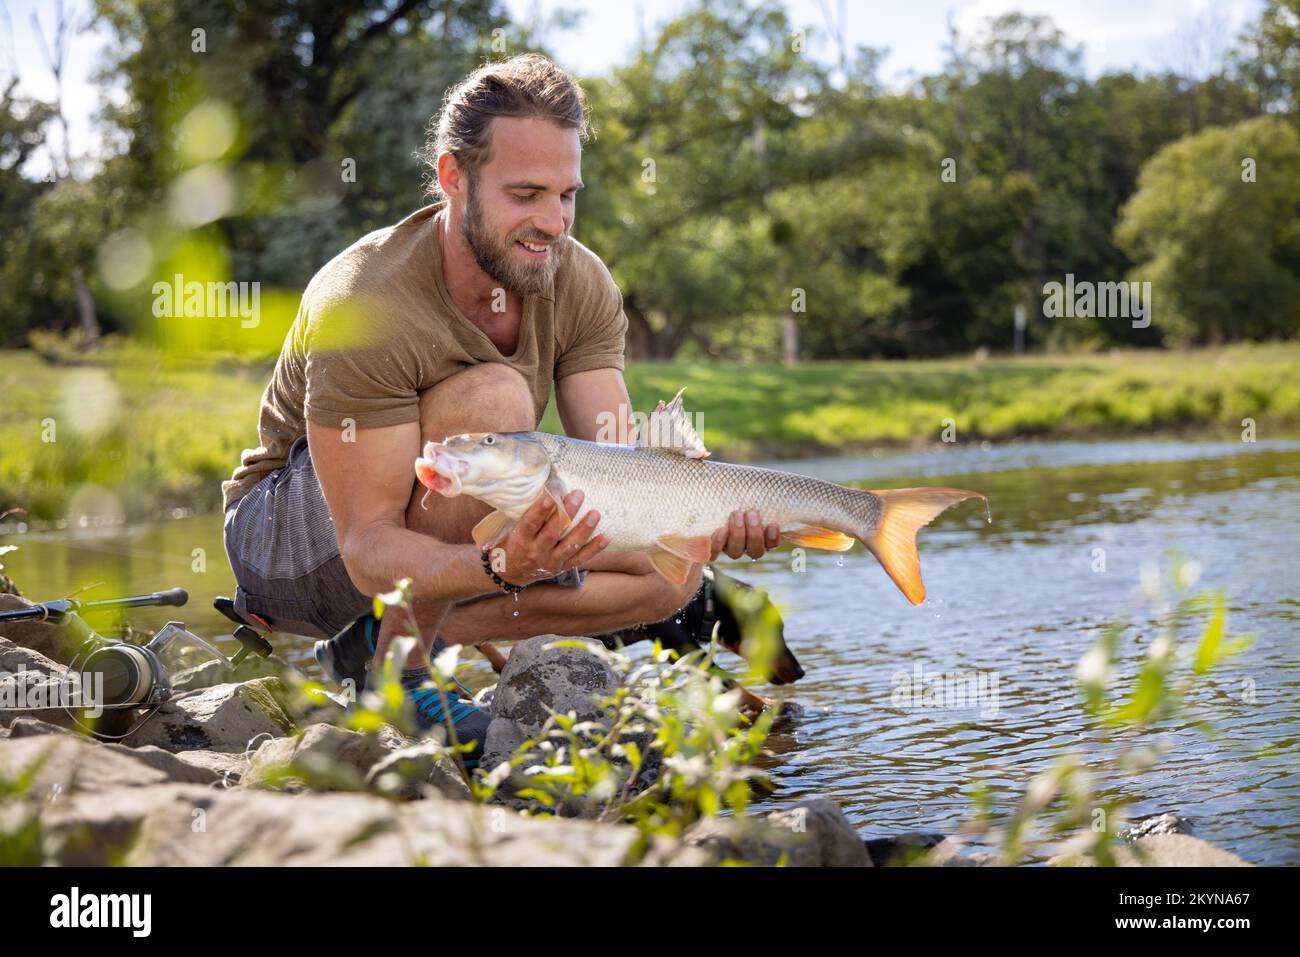 Successful hobby fisher caught a fish in a river Stock Photo